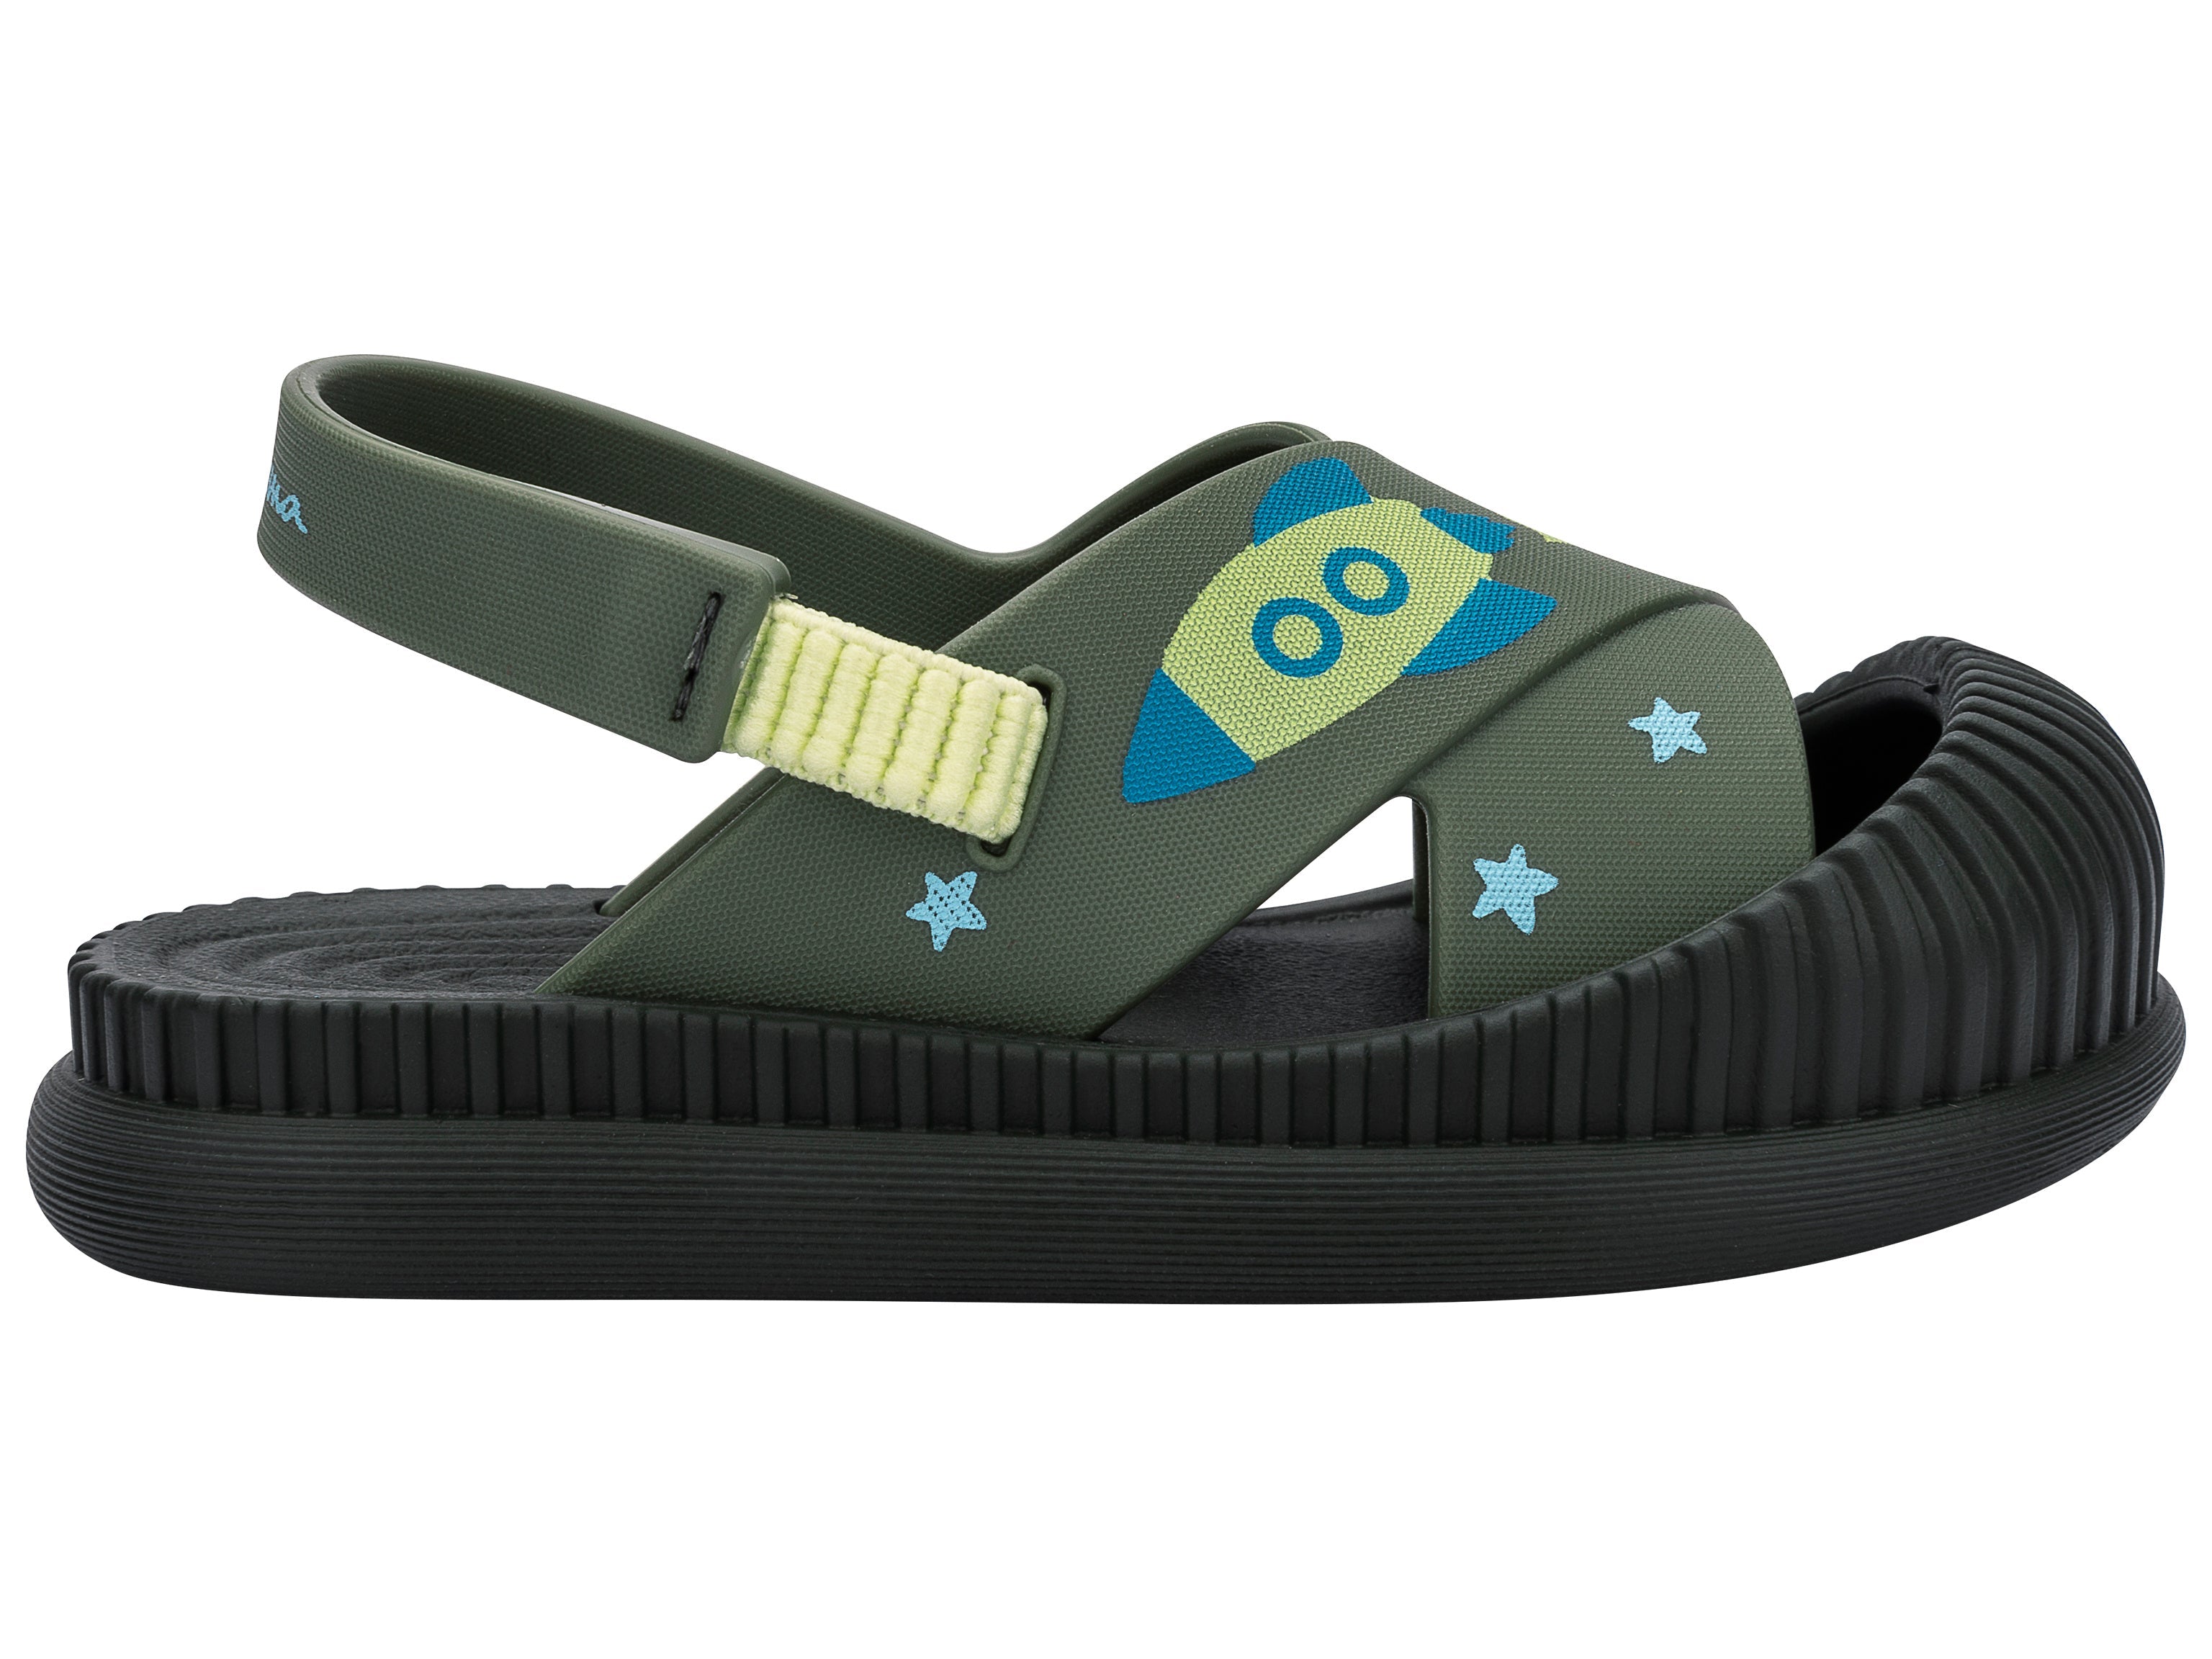 Outer side view of a green Ipanema Cute baby sandal with rocket ship on the strap.